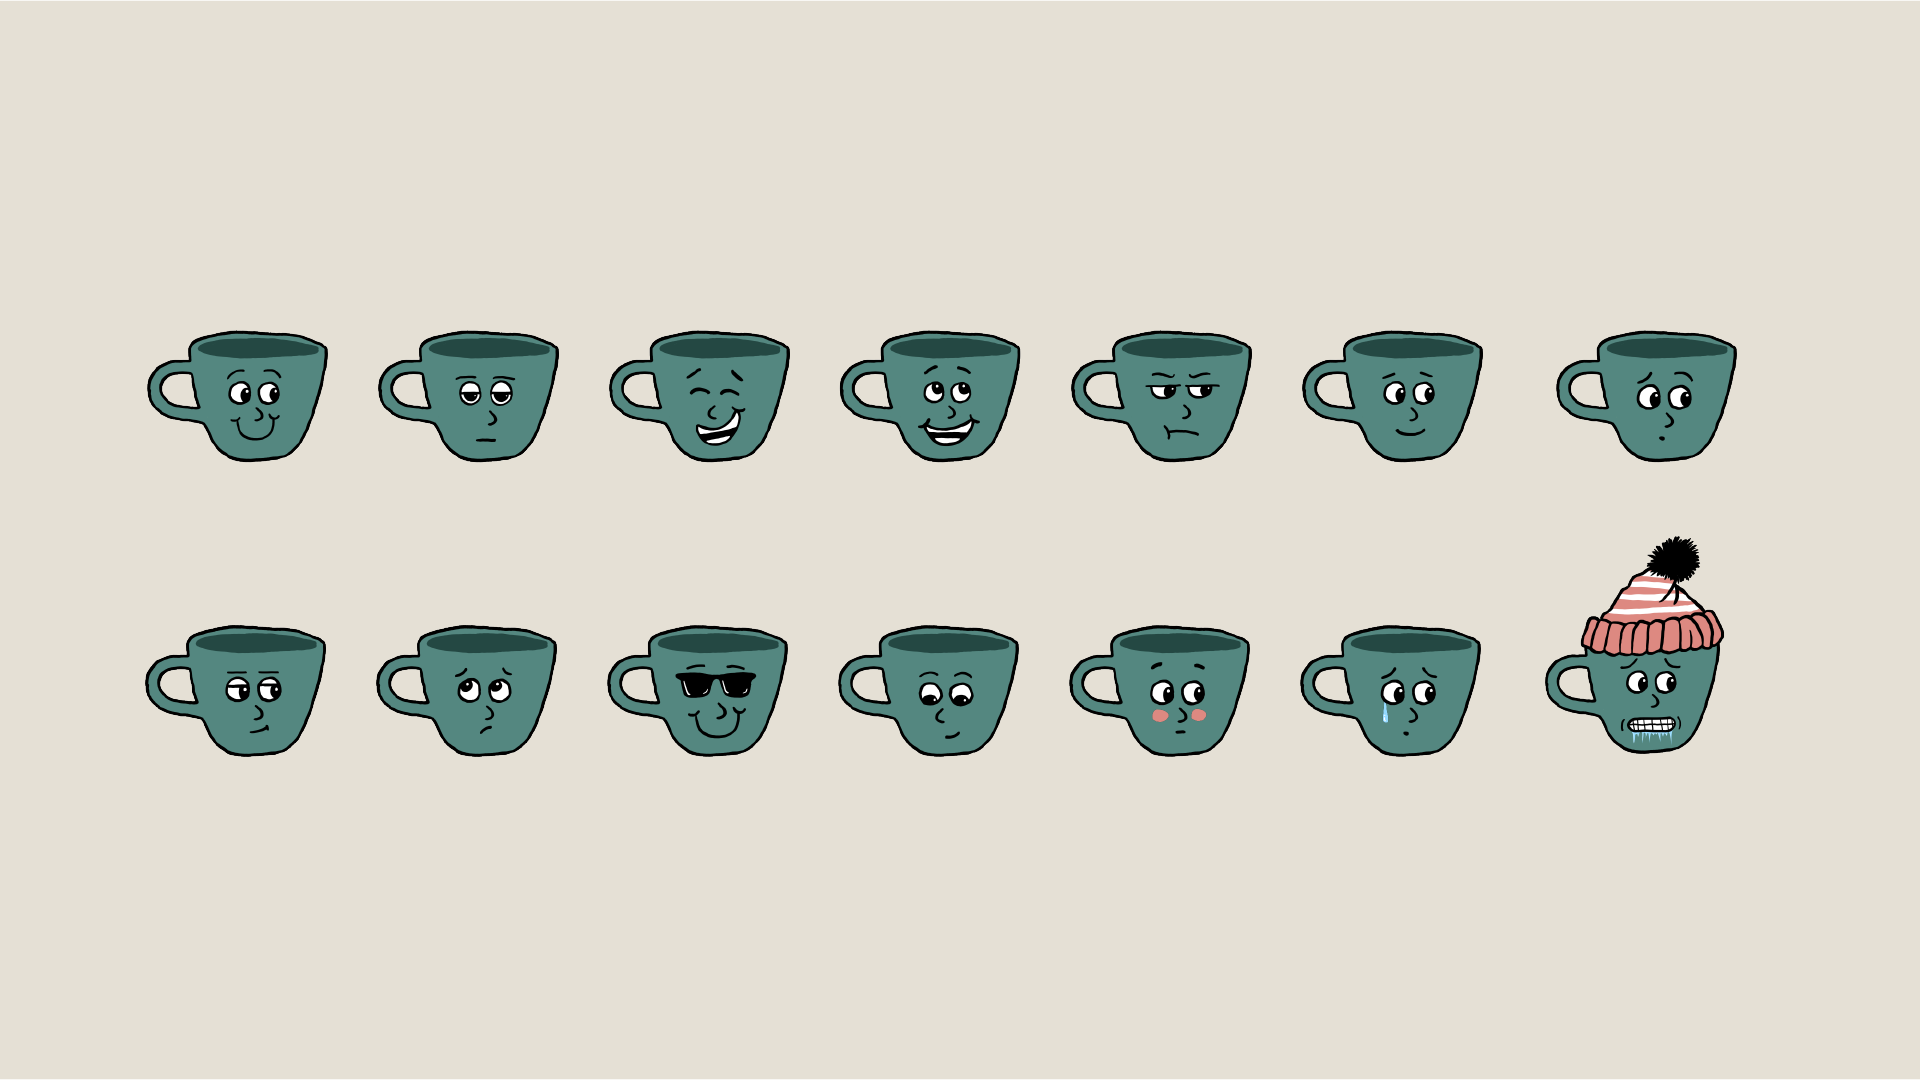 There are fourteen faces for Collin. In order from left to right and top to bottom, they are happy, sleepy, laughing, ecstatic, grumpy, content, bemused, smirking, concerned, cool, peaking, embarrassed, sad, and cold.